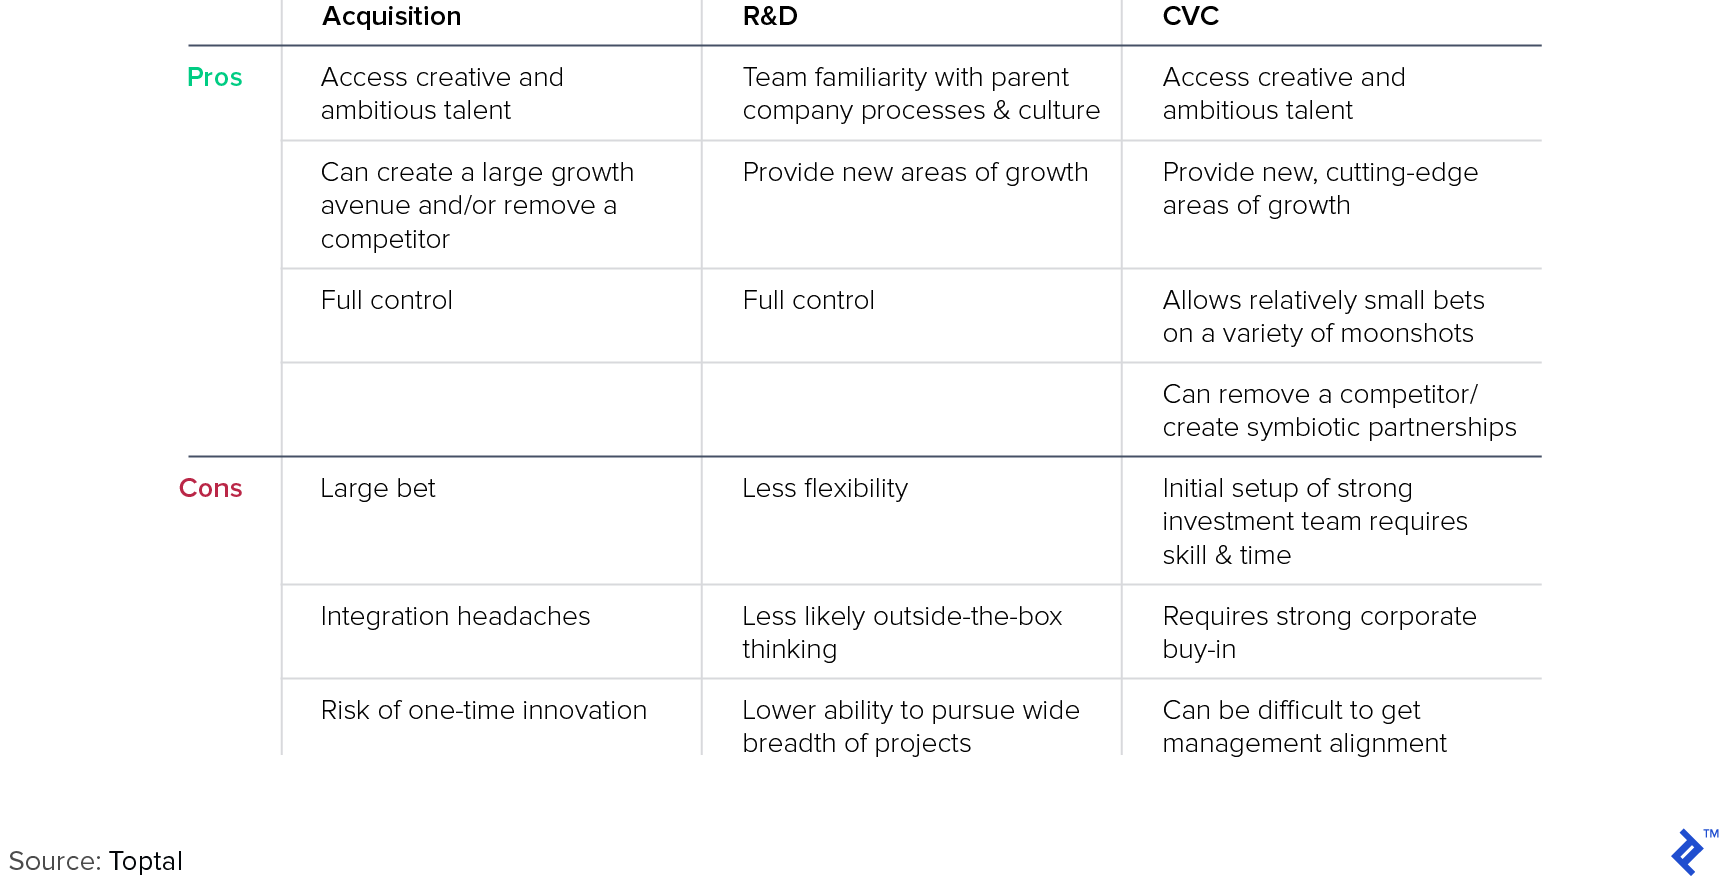 Comparison of the Pros and Cons of Acquisition, R&D, and CVC